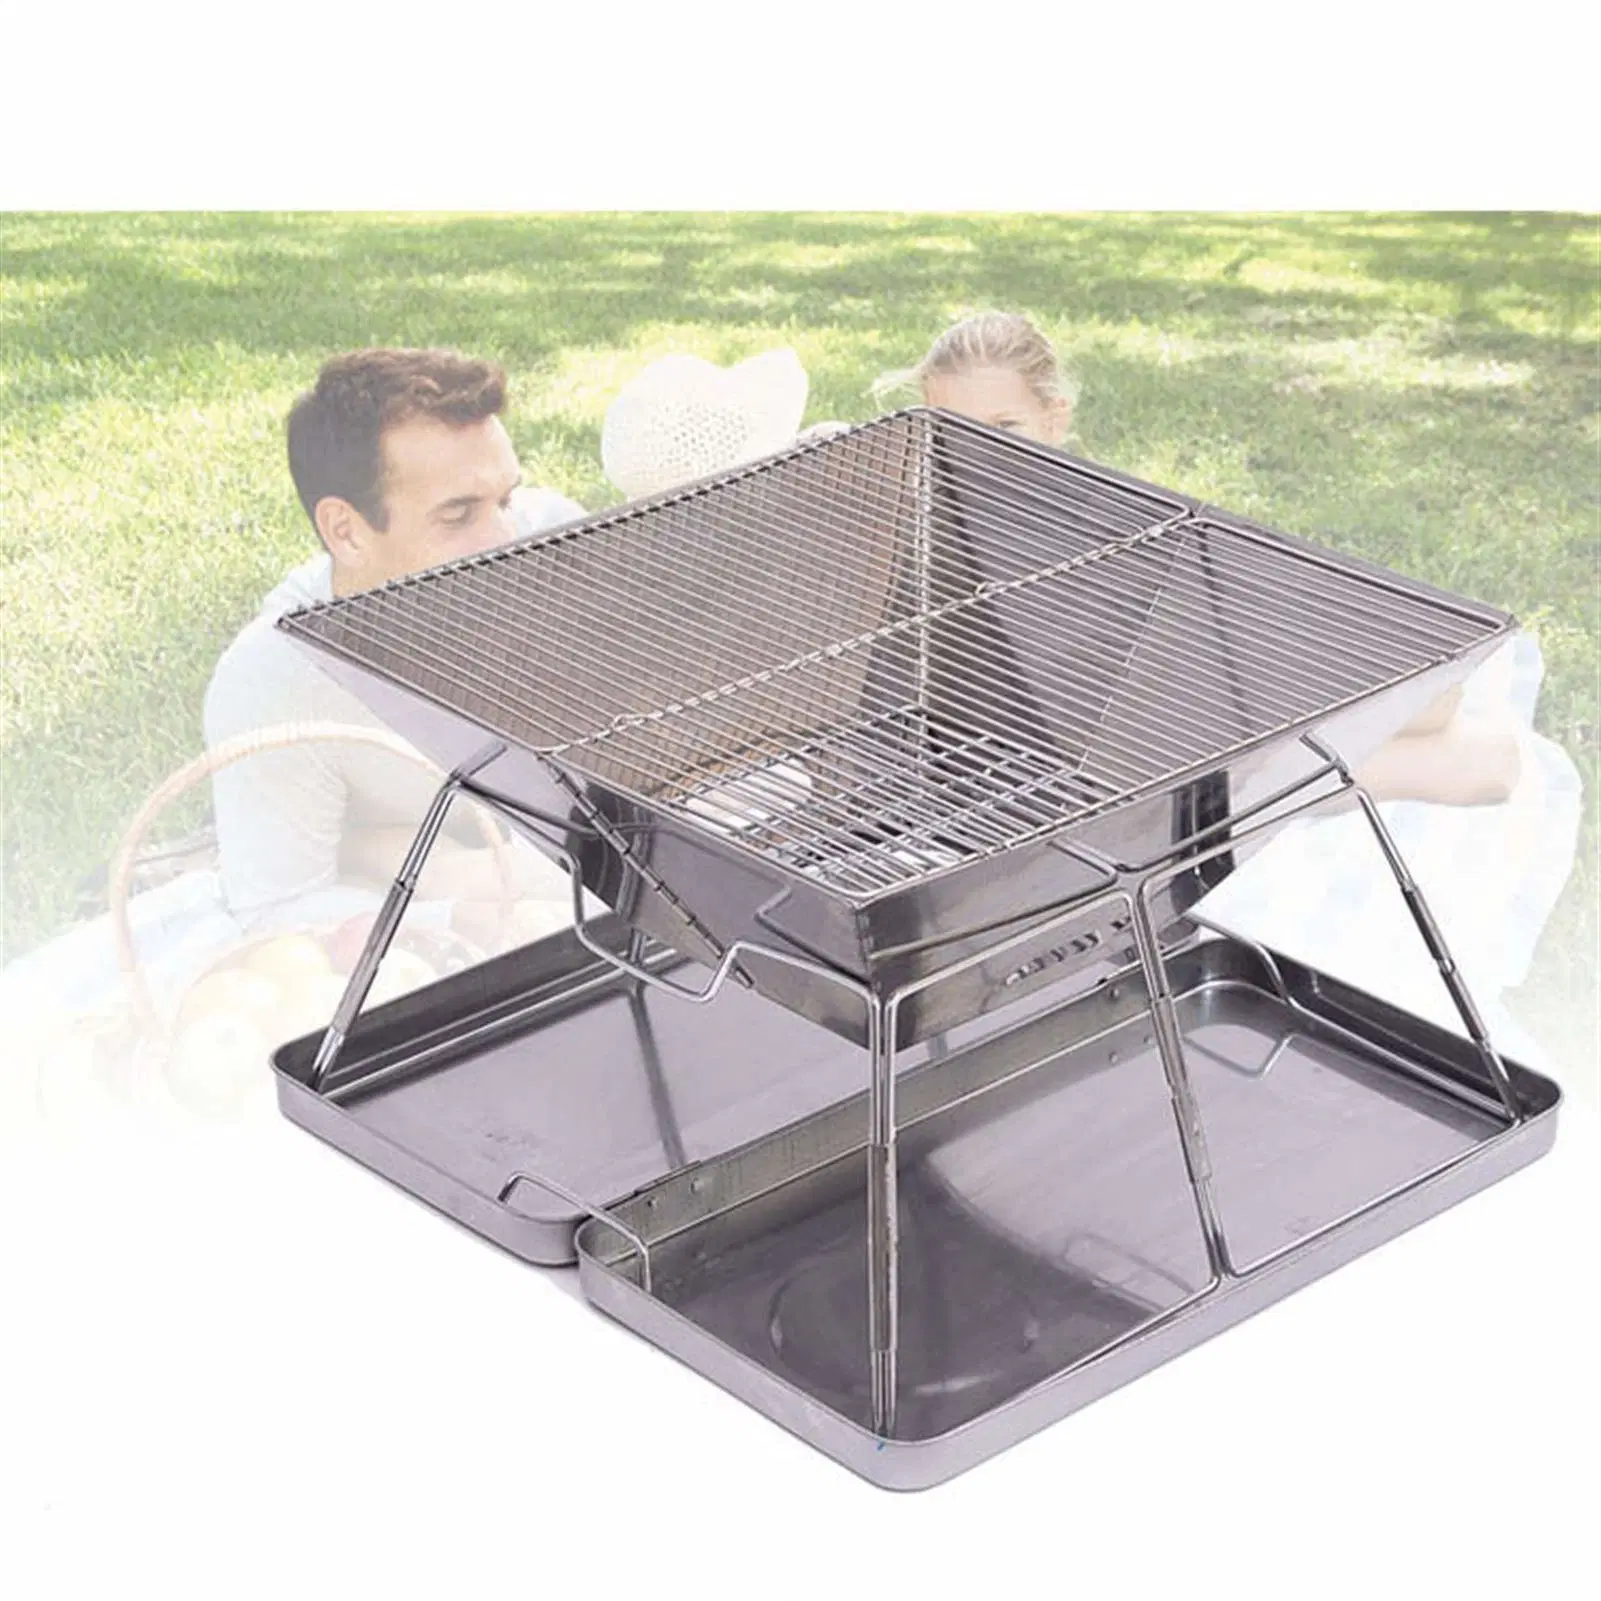 Portable Folding Charcoal BBQ Grill Stainless Steel Charcoal Grill for Outdoor Camping Picali